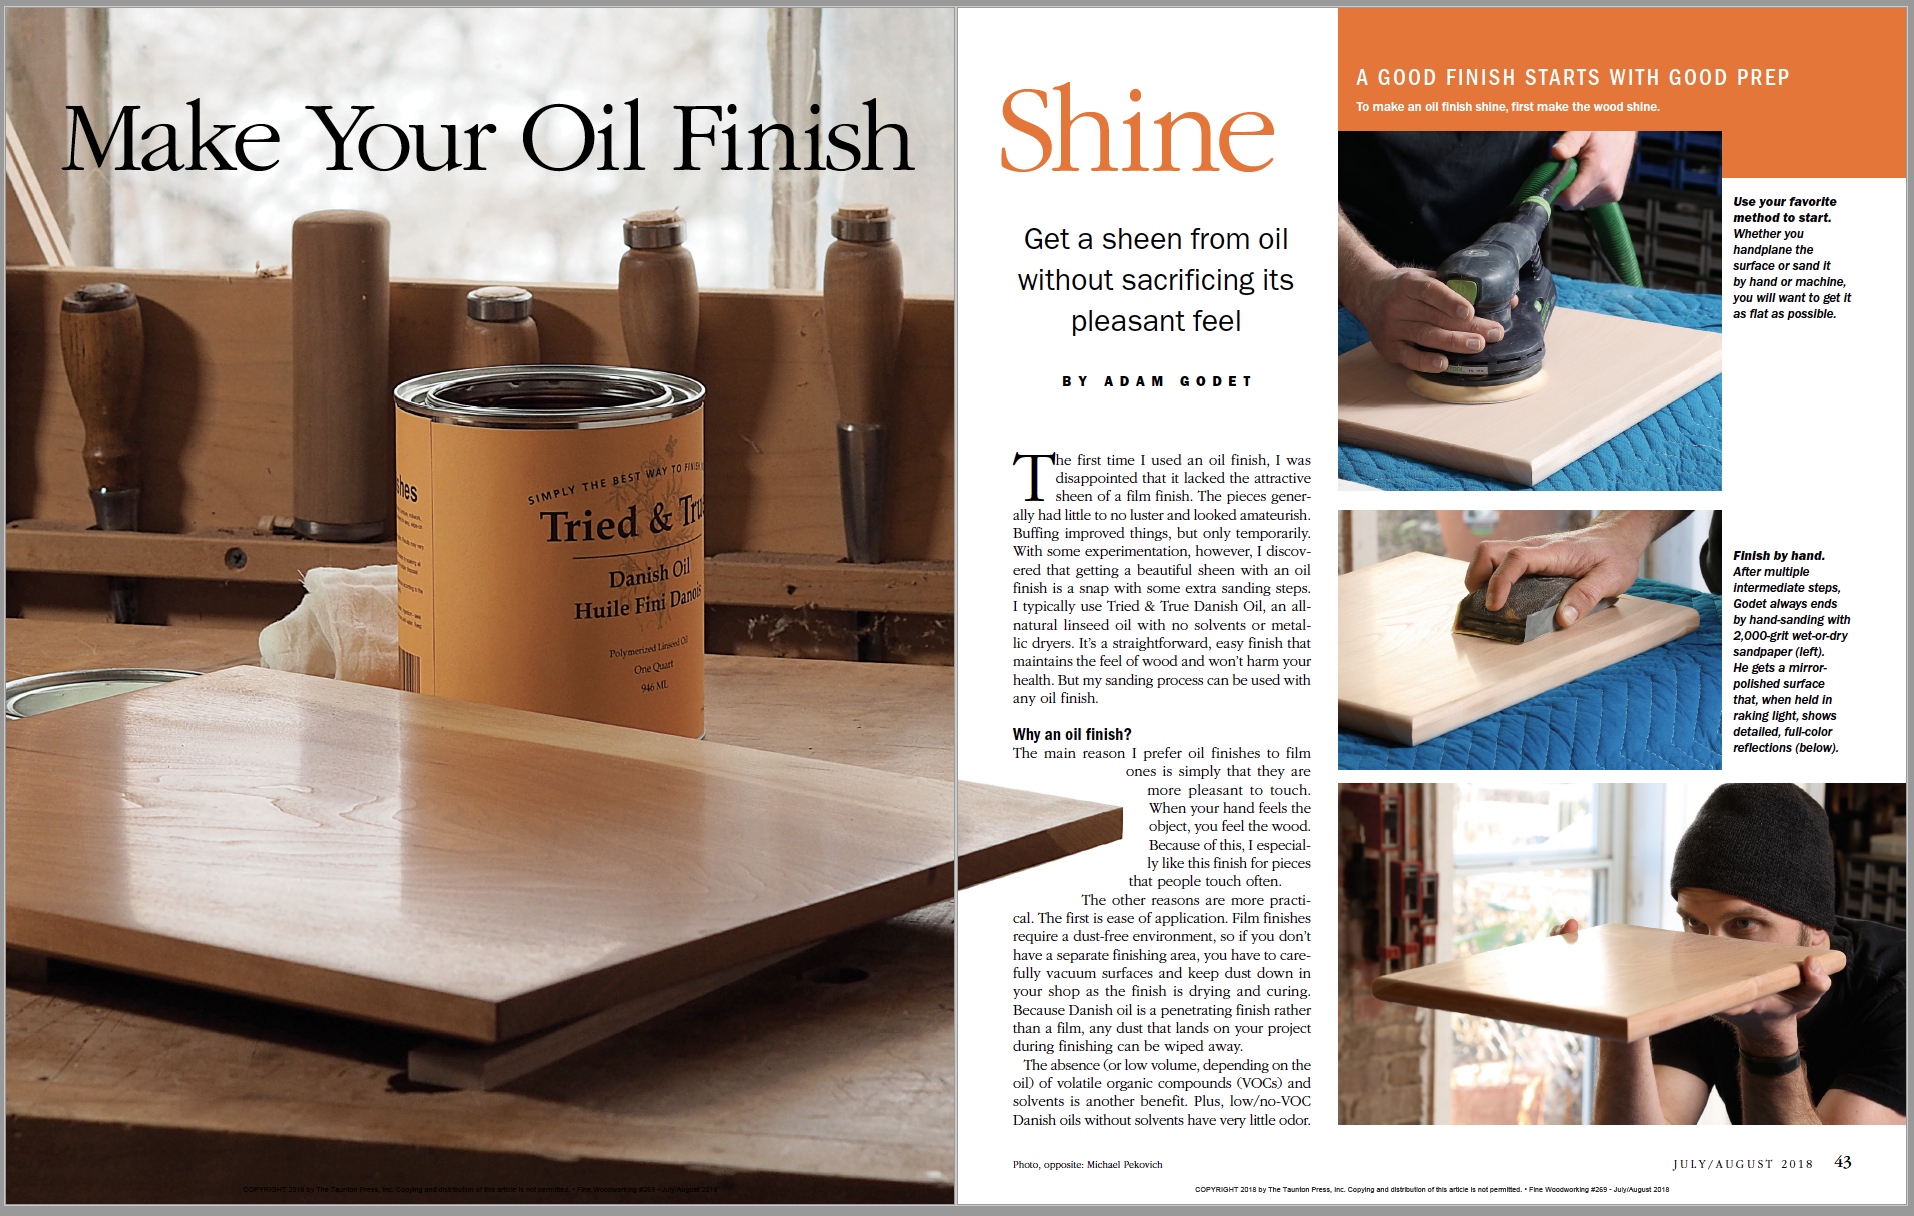 Tips and Tricks For Getting A Sheen From an Oil Finish